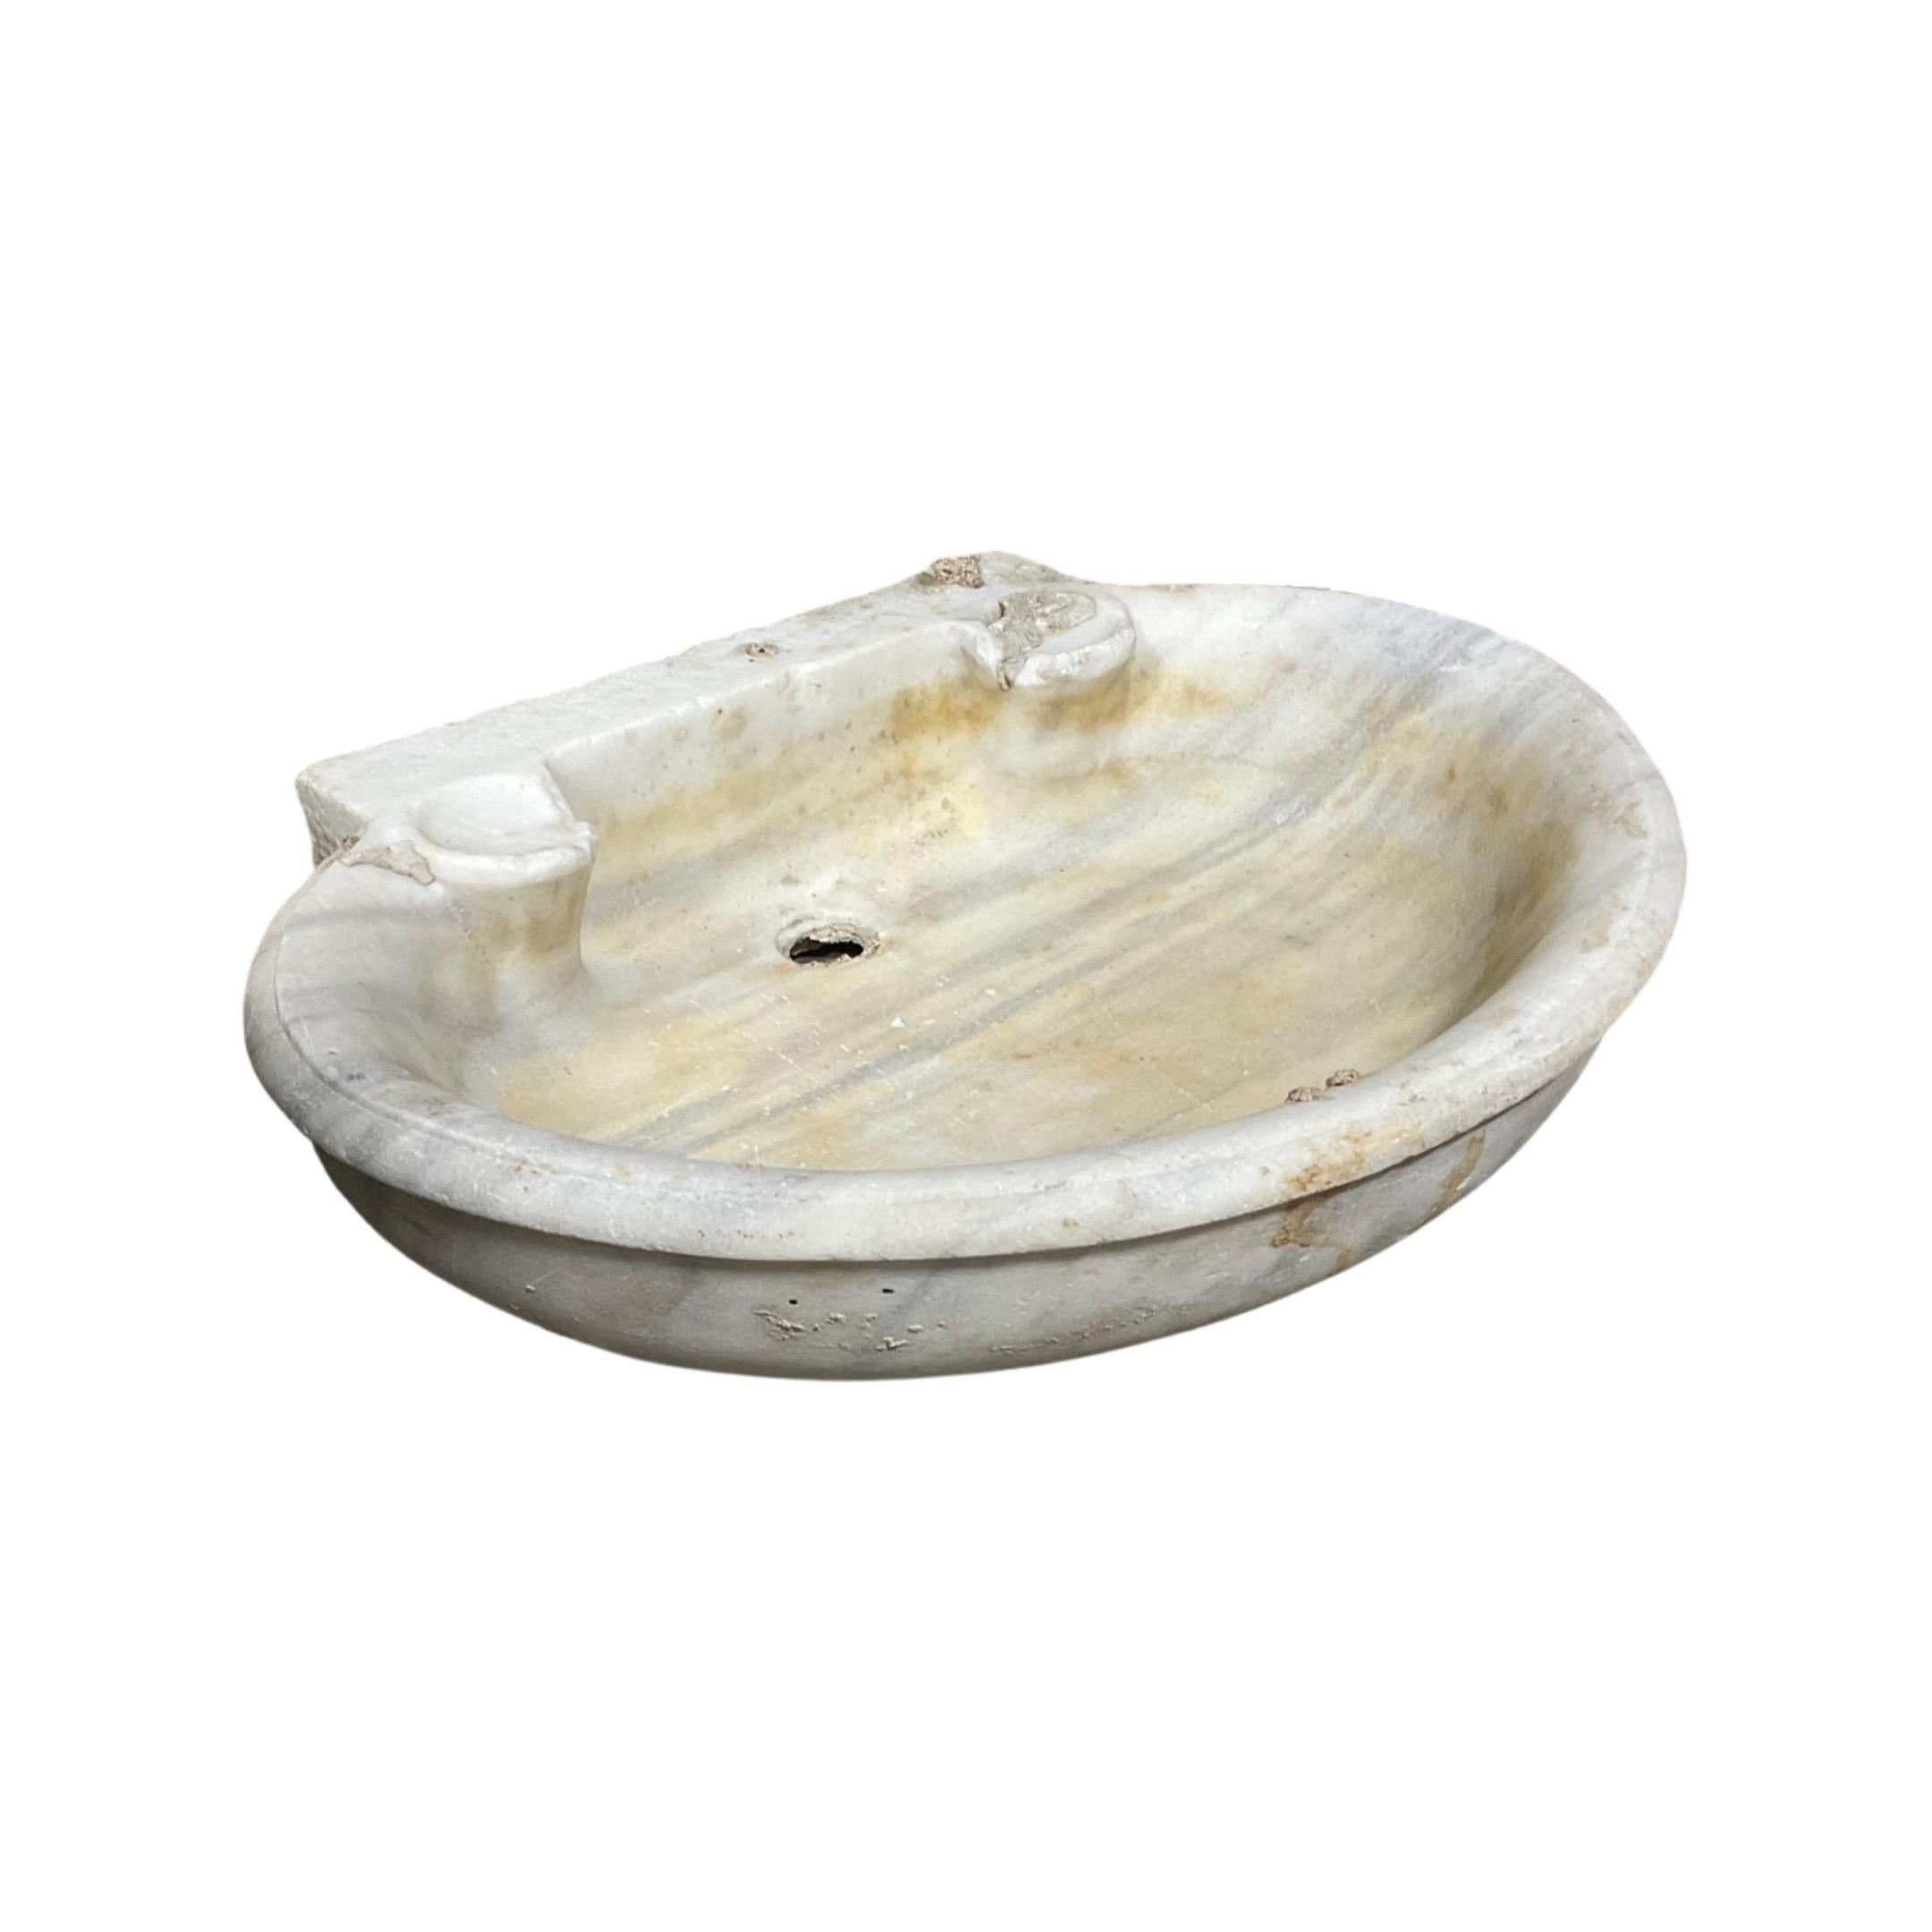 This 18th century French white marble oval sink is an elegant basin crafted from natural marble. Featuring an oval design and a smooth polished surface, it provides exceptional durability, has a timeless design, and is easy to clean and maintain.